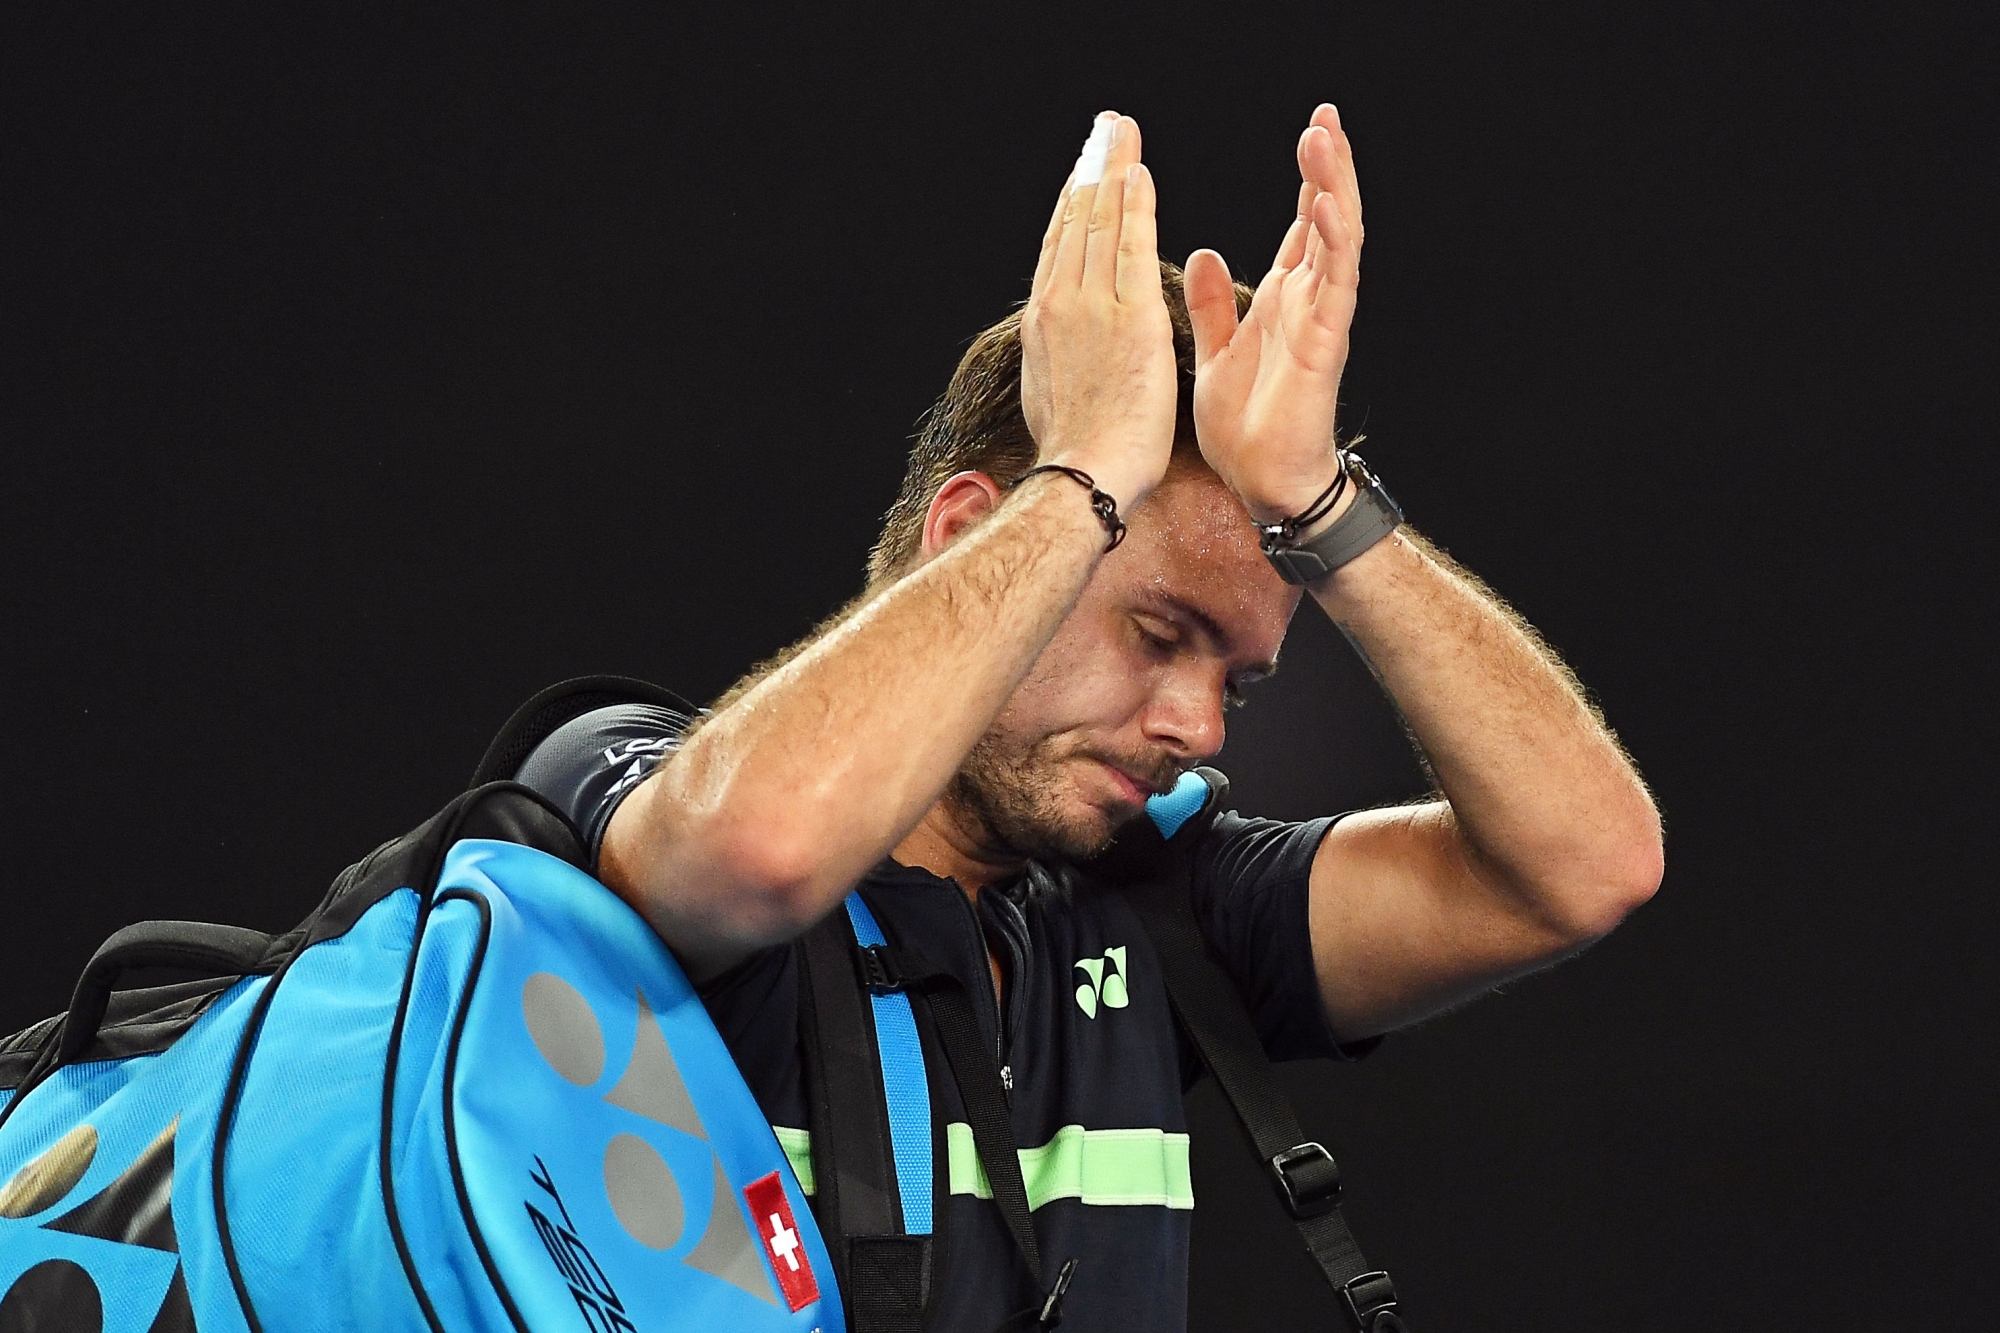 epa06449599 Stan Wawrinka of Switzerland reacts after losing his second round match against Tennys Sandgren of the USA at the Australian Open Grand Slam tennis tournament in Melbourne, Australia, 18 January 2018.  EPA/JULIAN SMITH AUSTRALIA AND NEW ZEALAND OUT AUSTRALIA TENNIS AUSTRALIAN OPEN GRAND SLAM